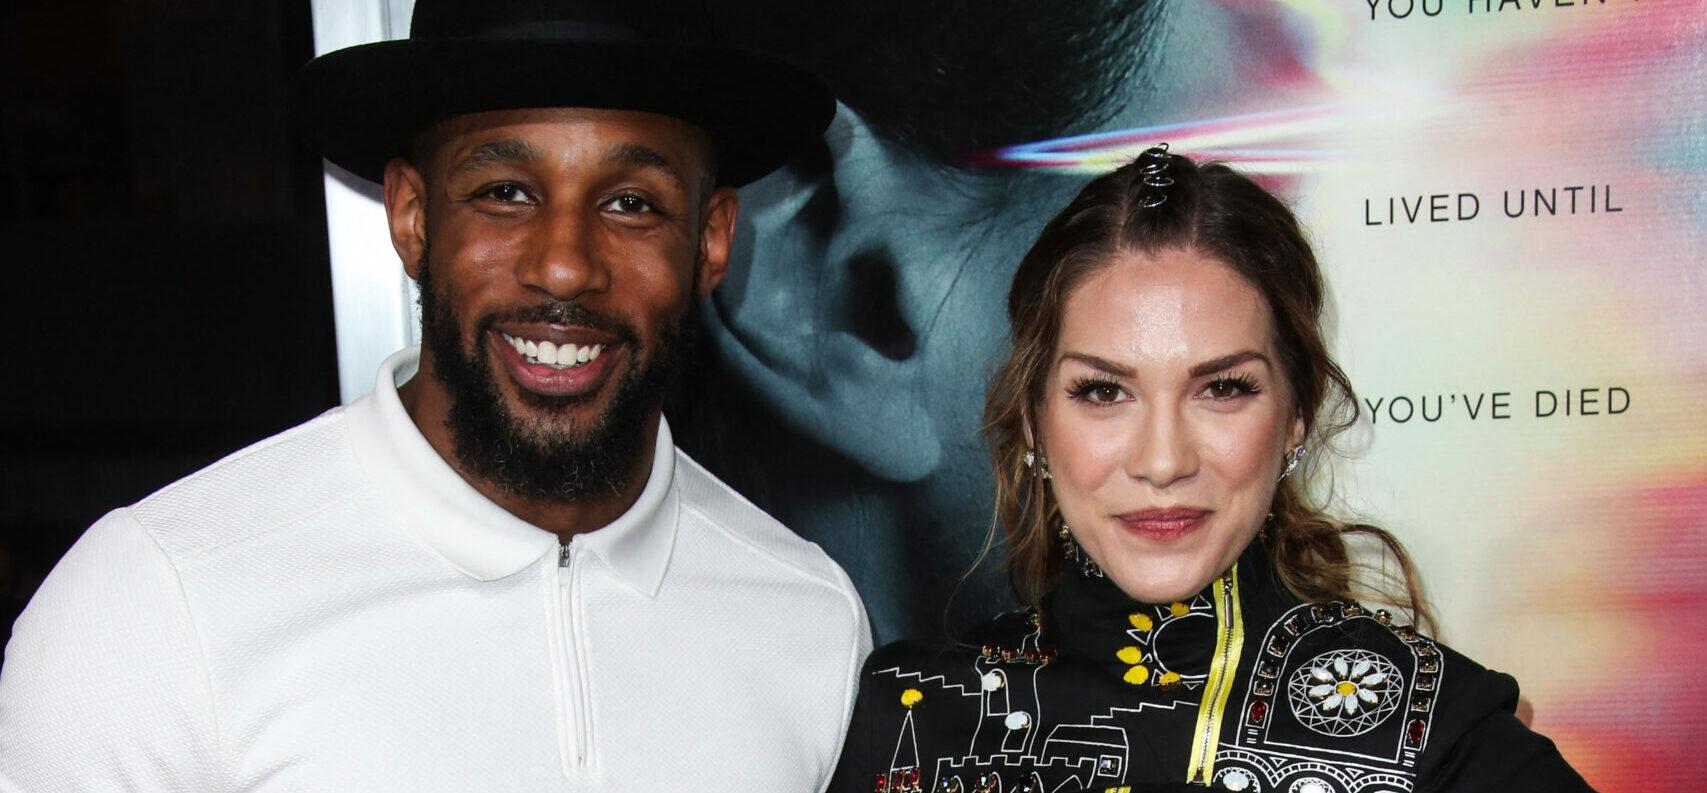 Allison Holker Finally Sells Home For $3.5M 11 Months After Stephen “tWitch” Boss’ Death